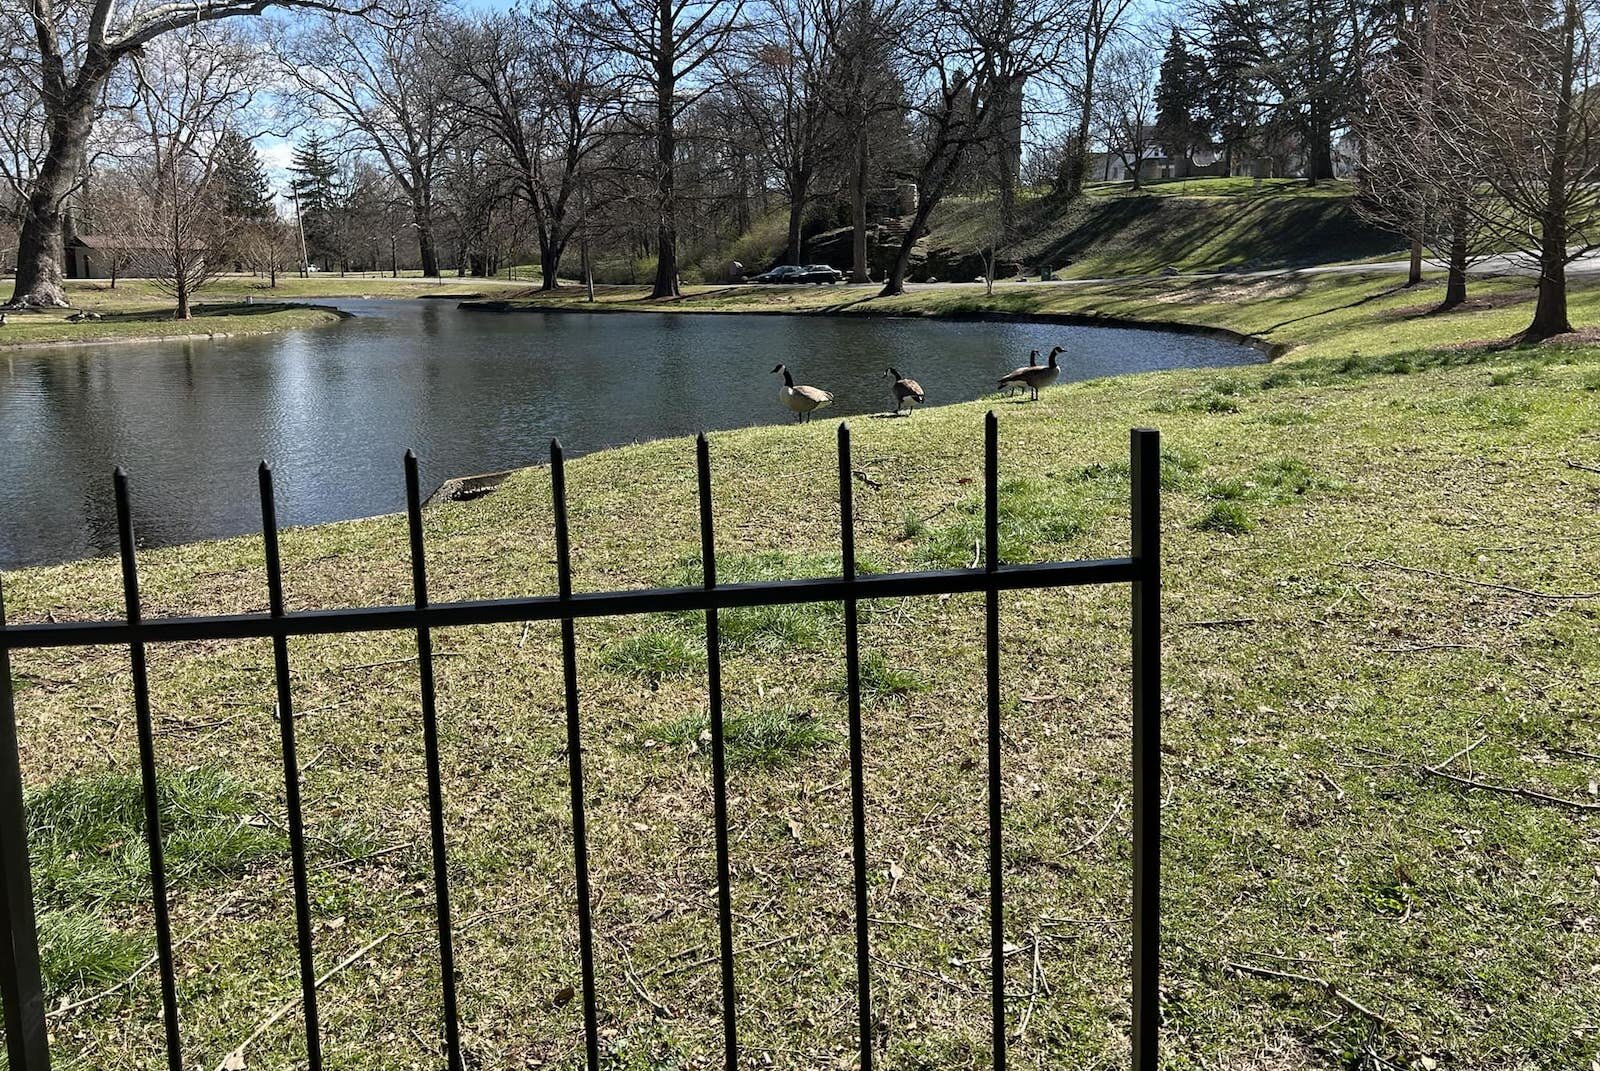 I came to the park to make new friends. The geese were very friendly and introduced themselves almost immediately! Here we see my friends Honk, Honk, Honk and Bitey. Such a beautiful day! Thank you for all of your kind words! — March 20 post